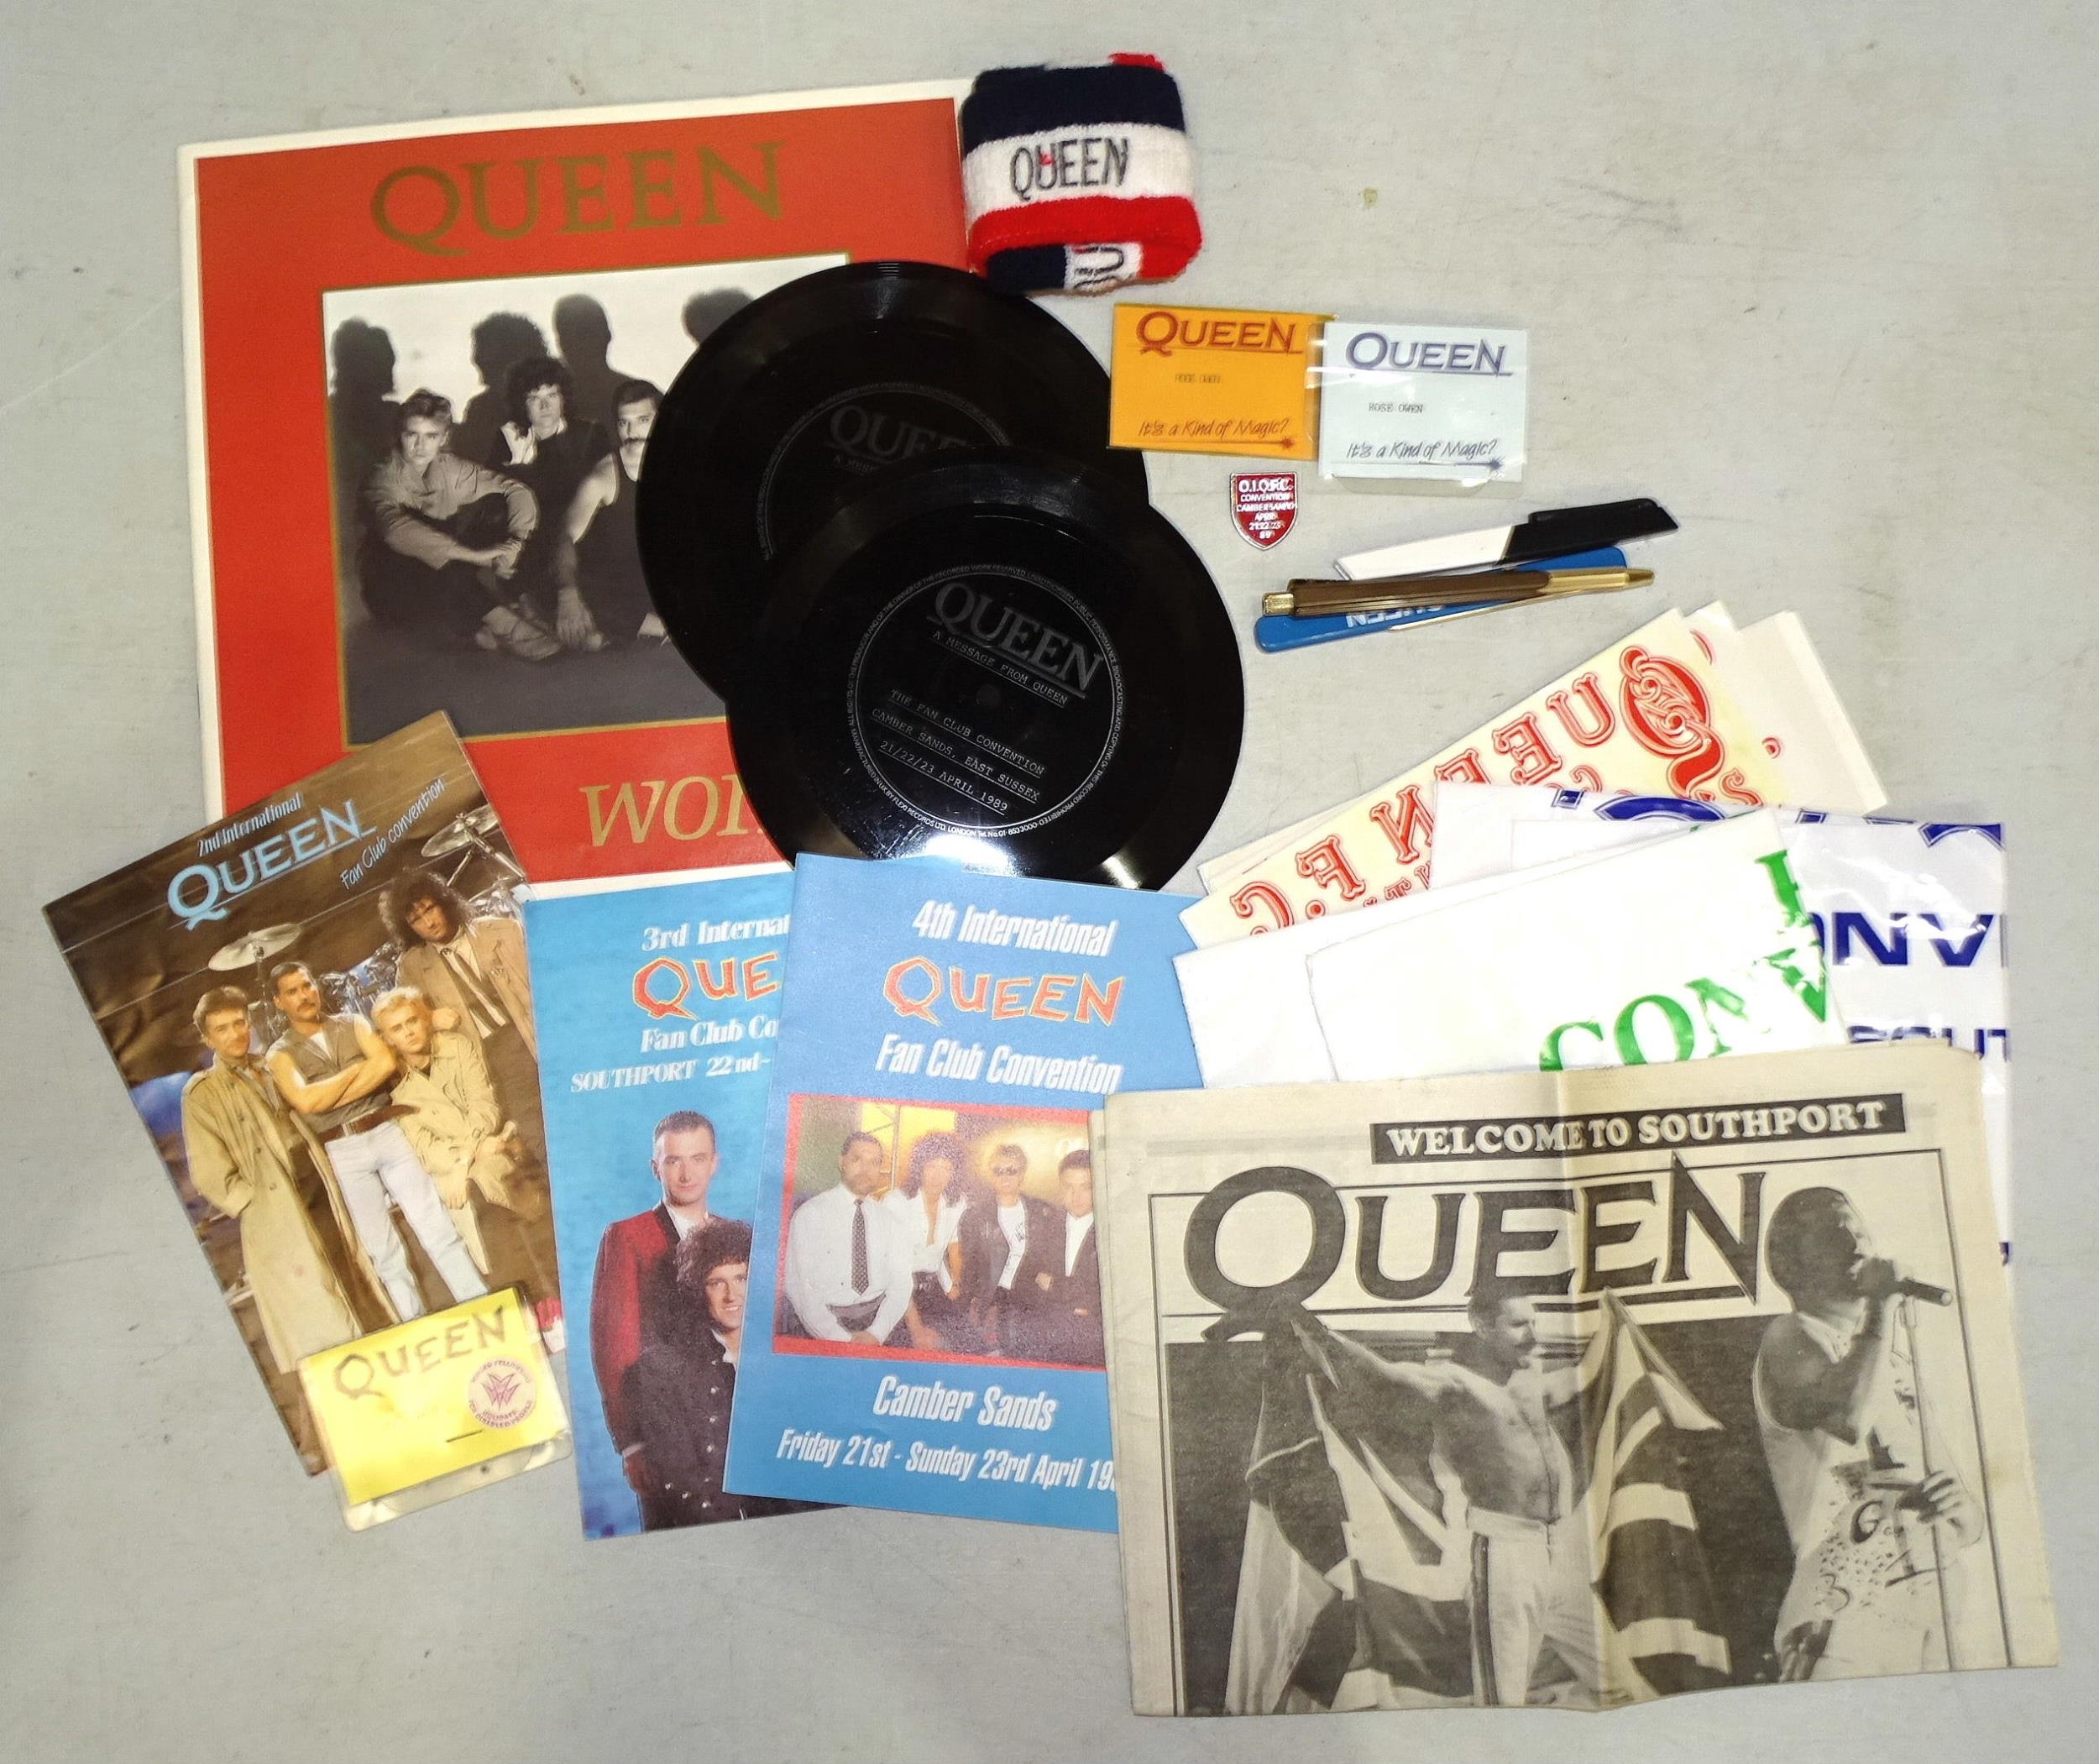 A collection of LP records, various genres, (a/f), including a "Queen Works" 1984 tour programme